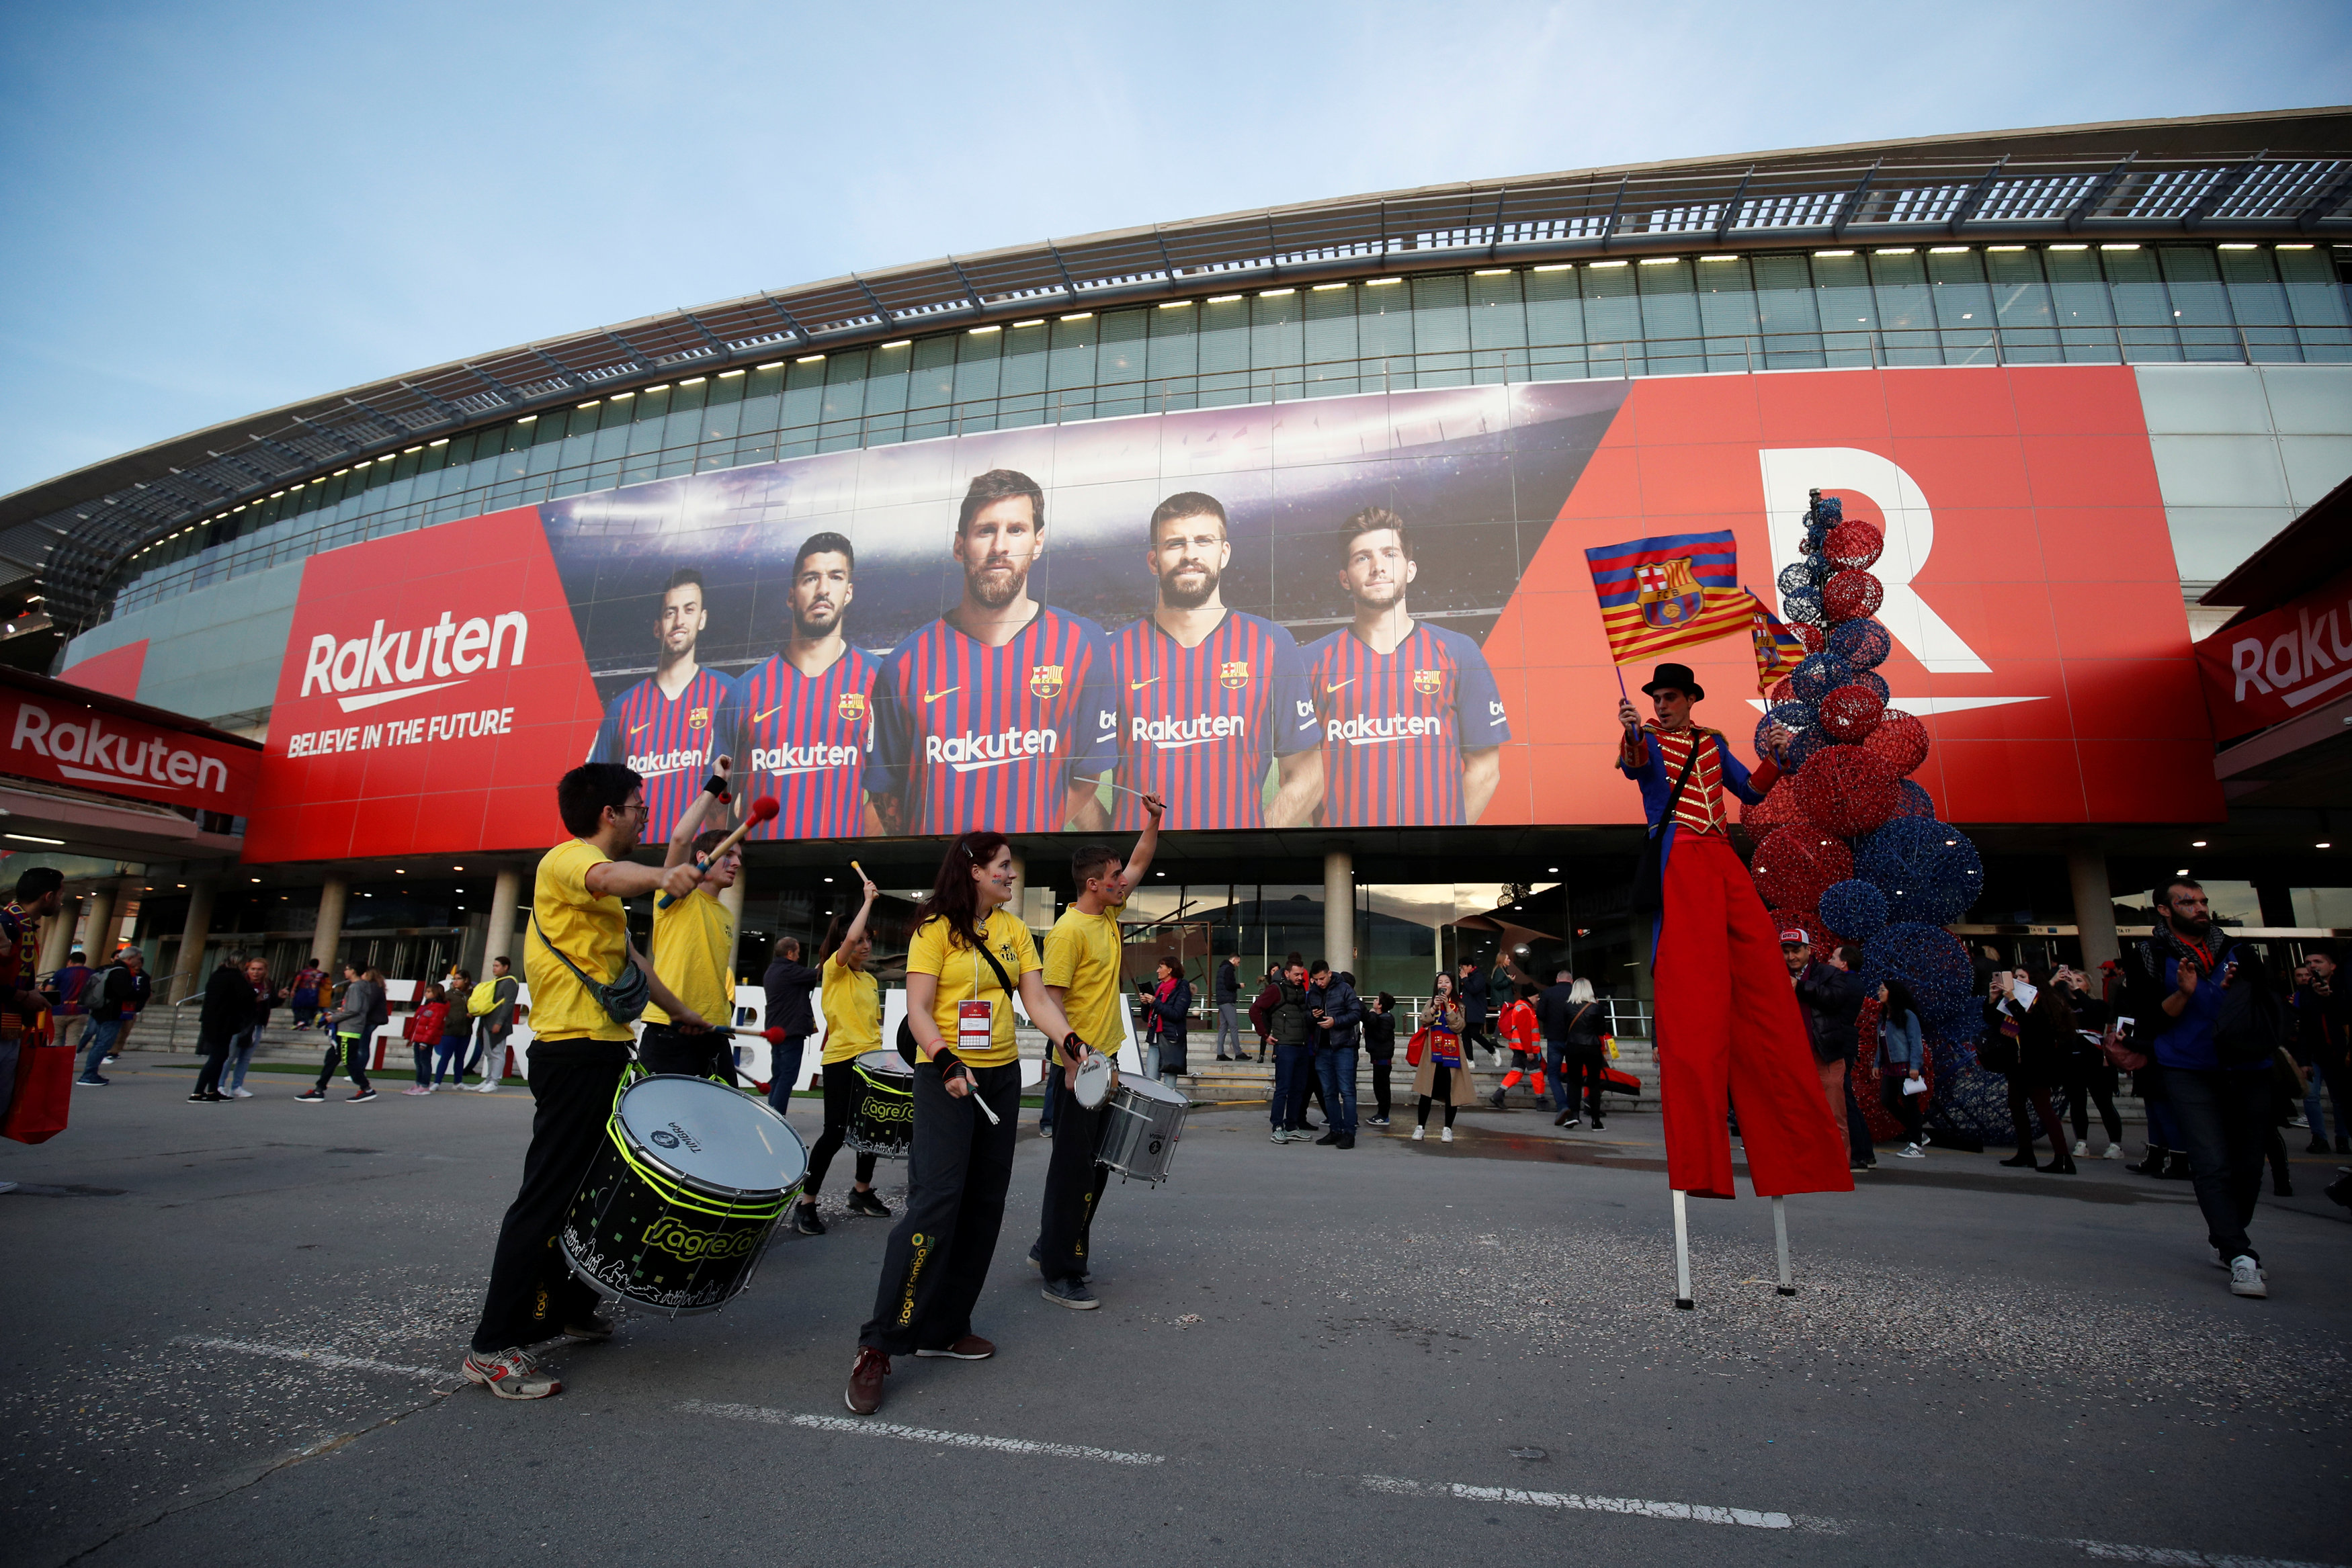 General view outside the FC Barcelona stadium with the logo of Rakuten (by Reuters)